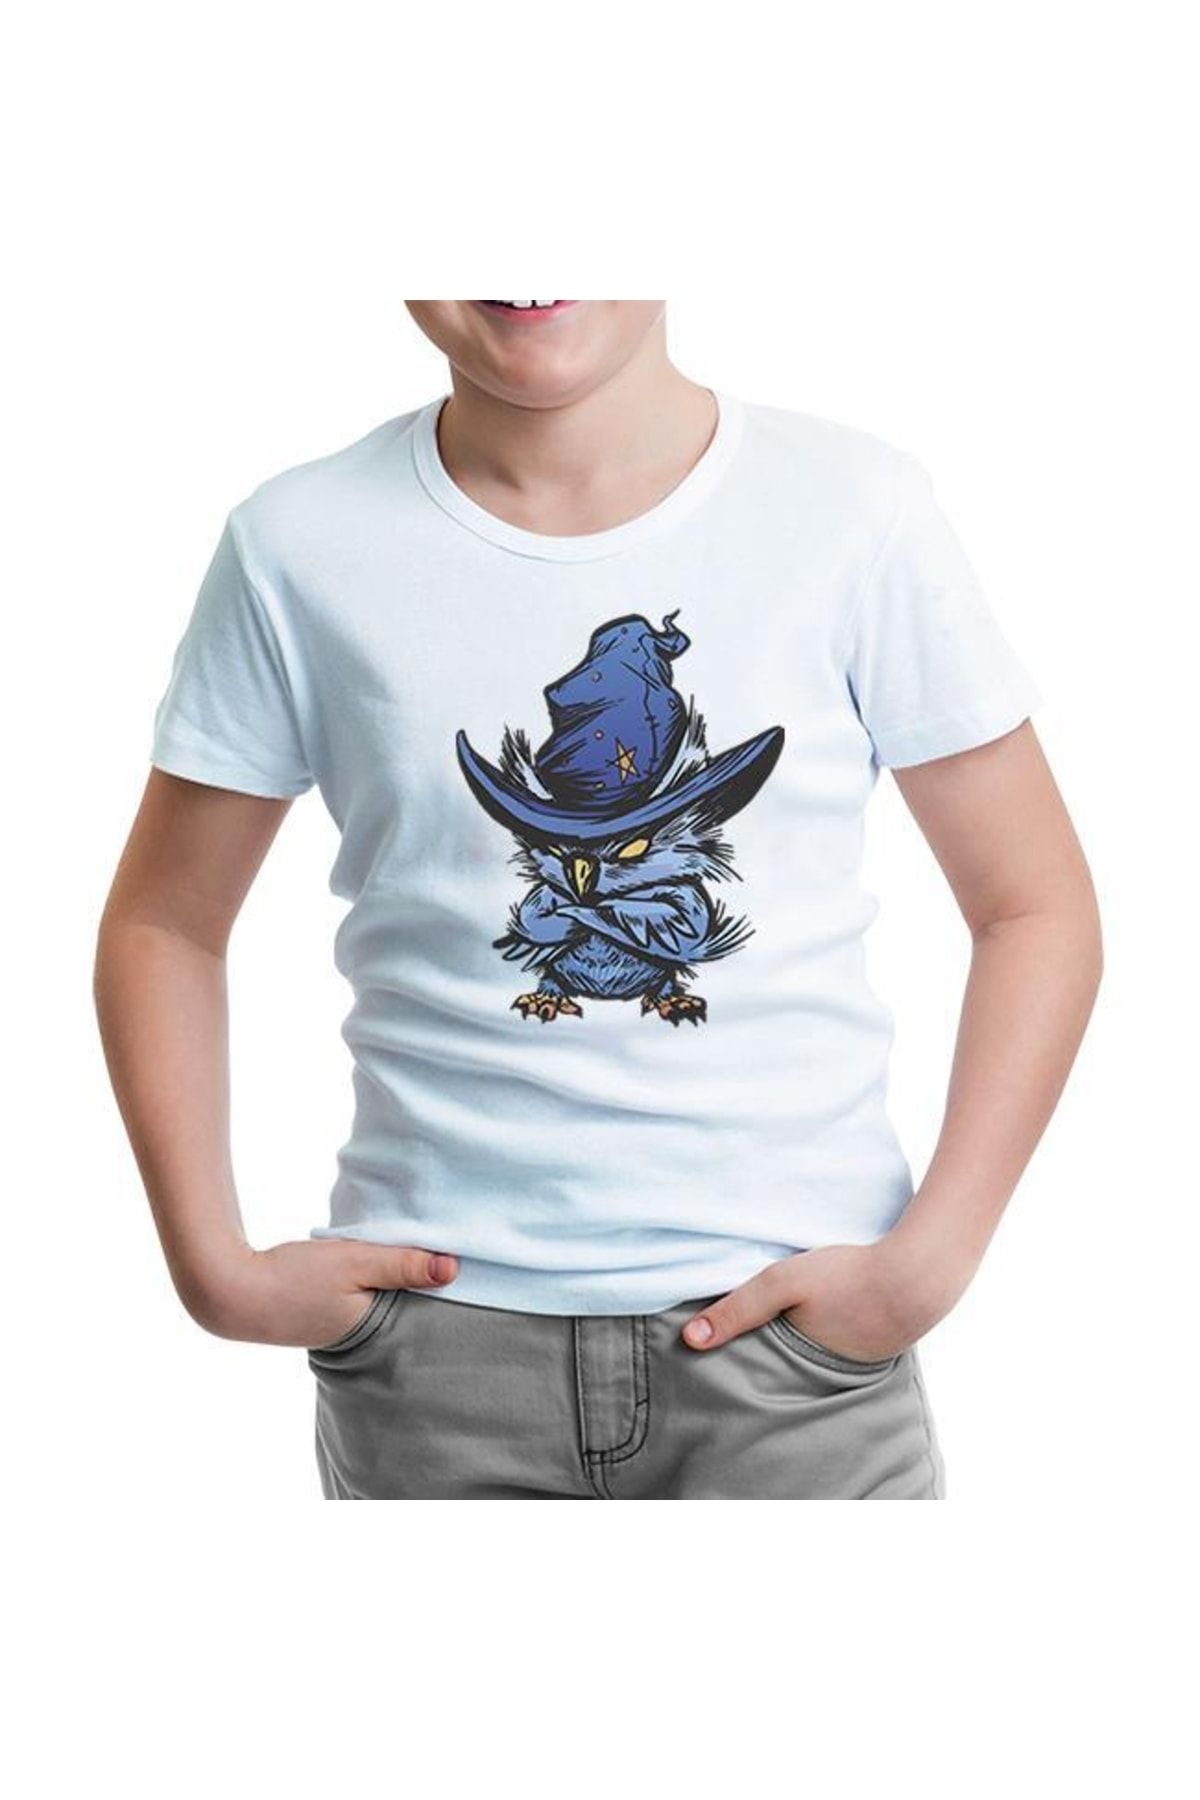 Lord T-Shirt An Angry Owl With A Hat Beyaz Çocuk Tshirt